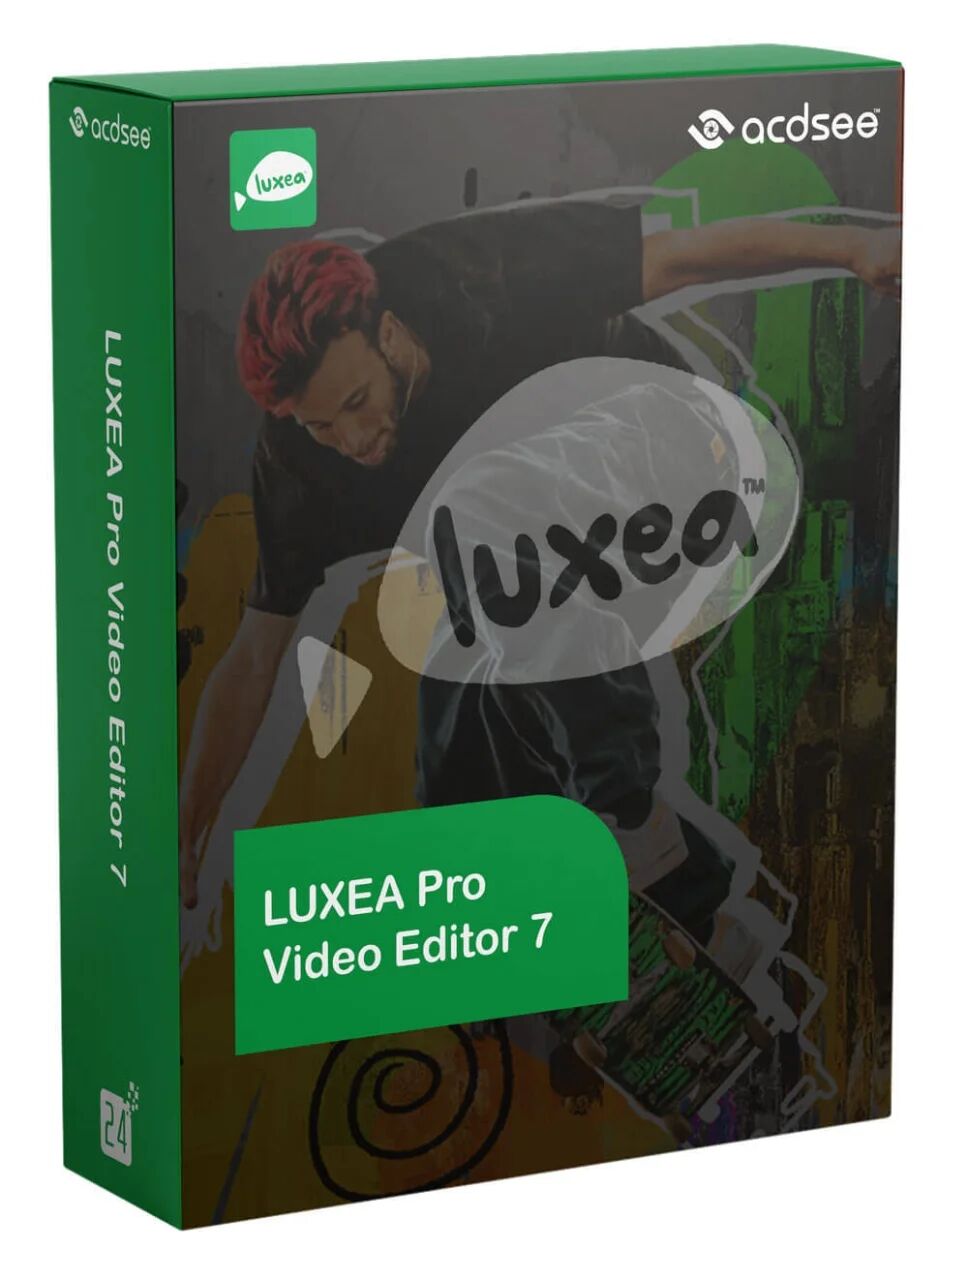 ACDSee LUXEA Pro Video Editor 7 New Purchase German